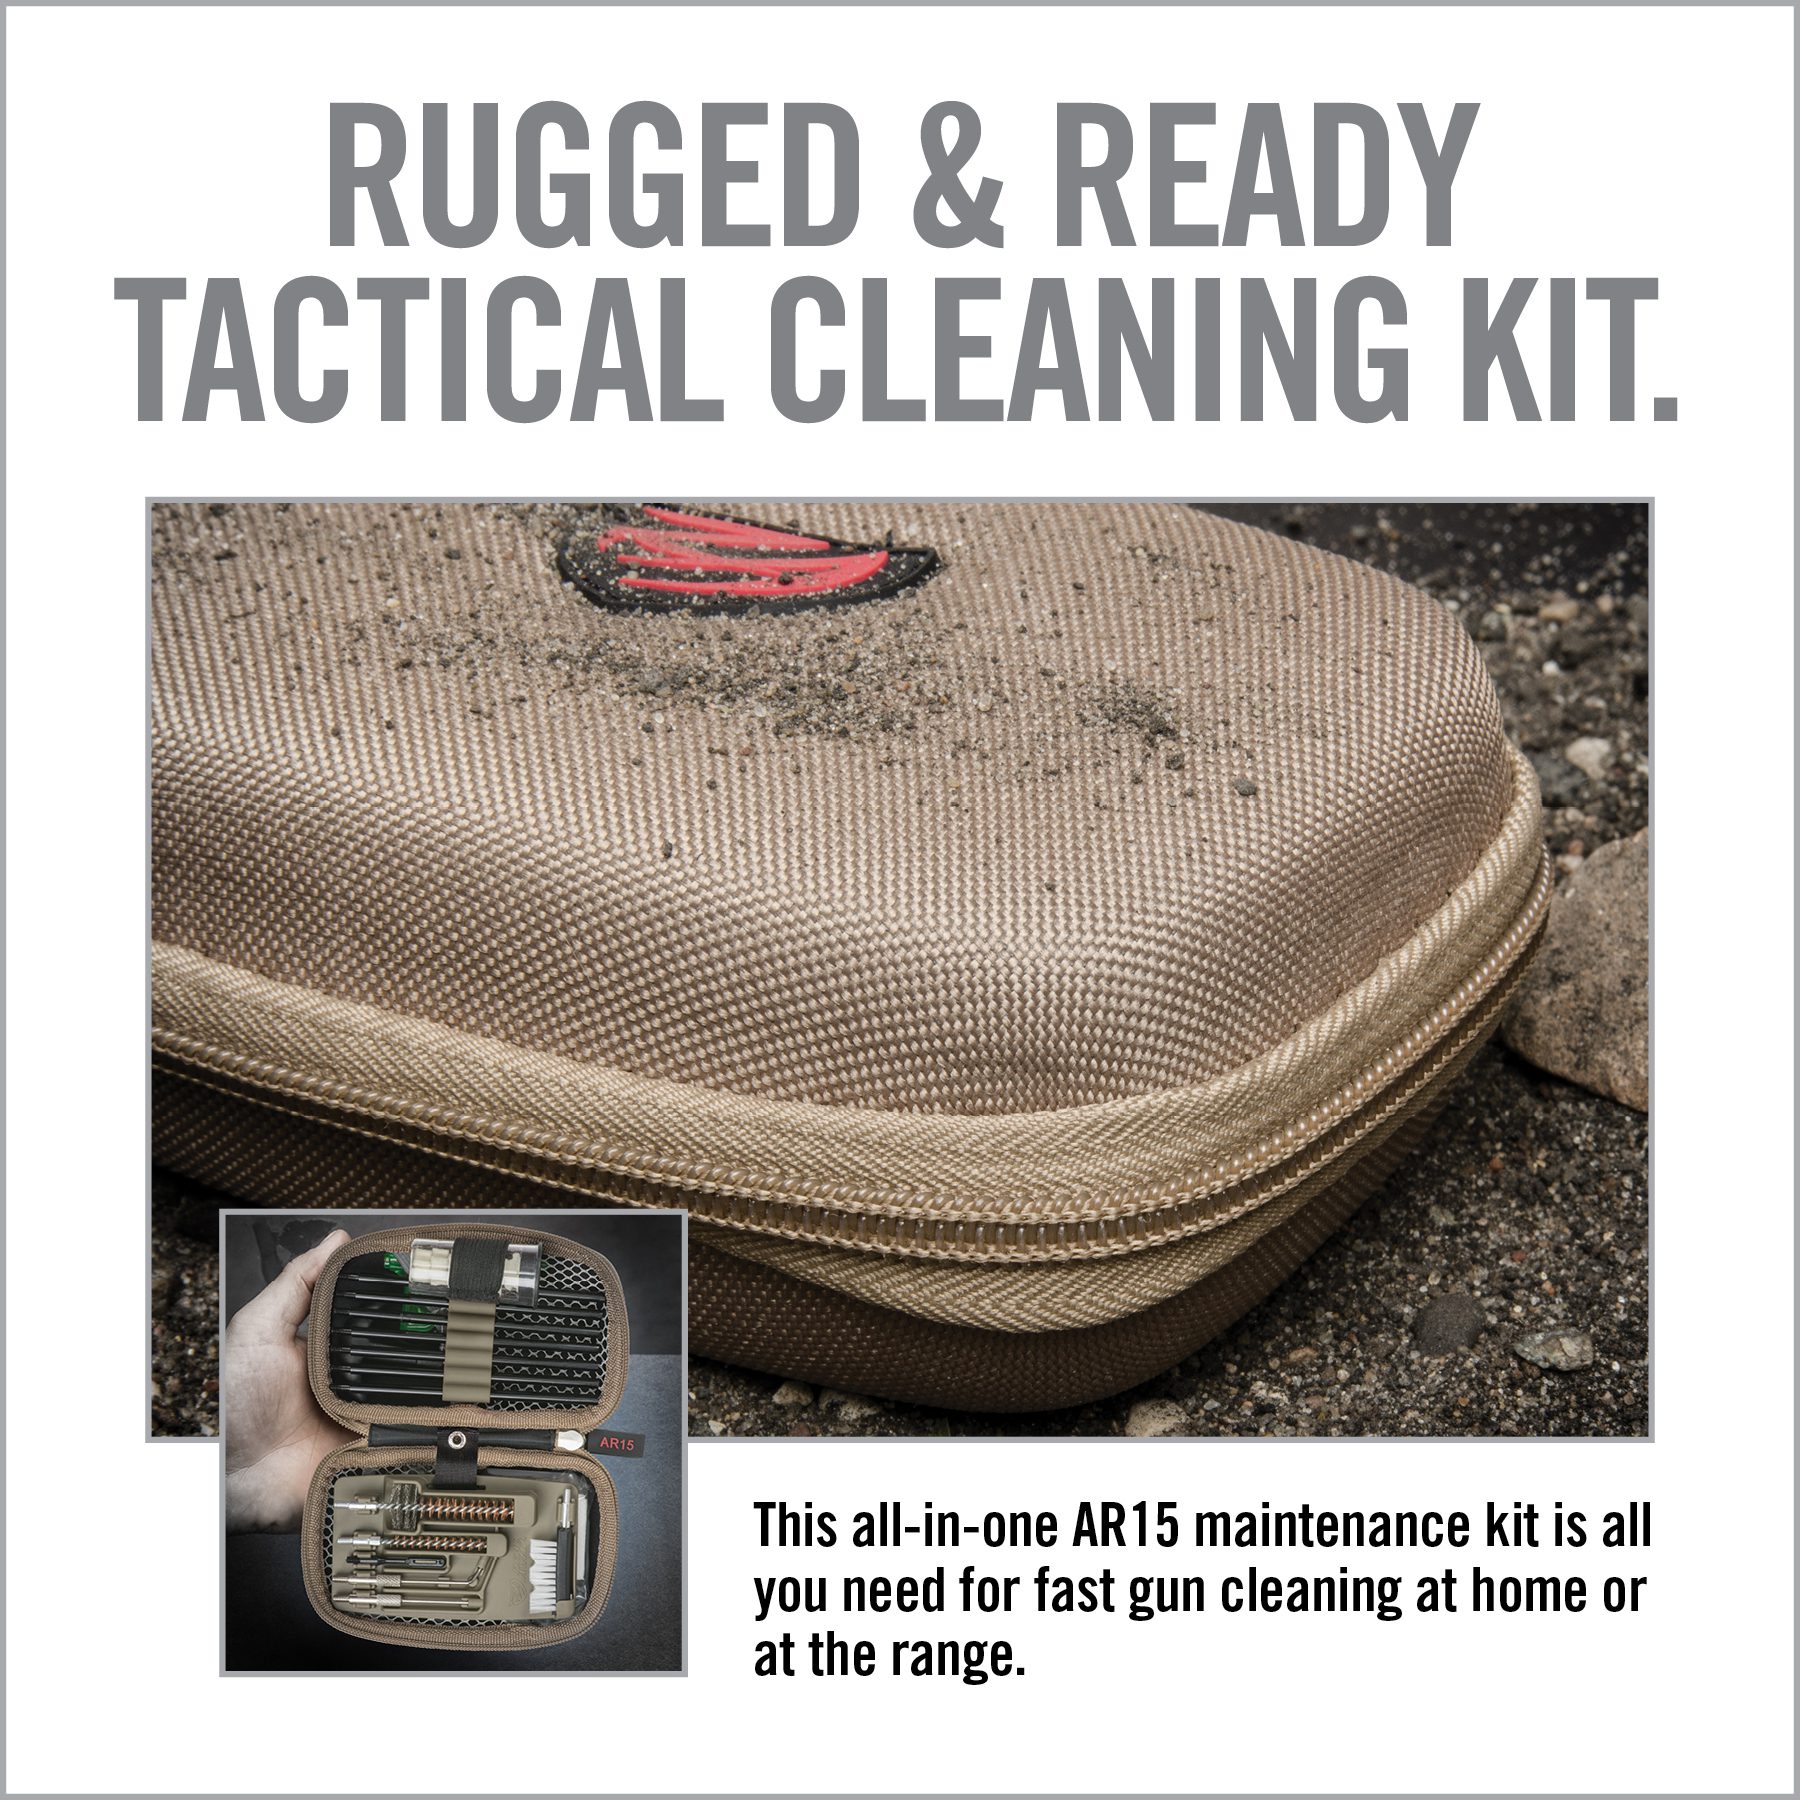 the rugged and ready tactical cleaning kit is in use